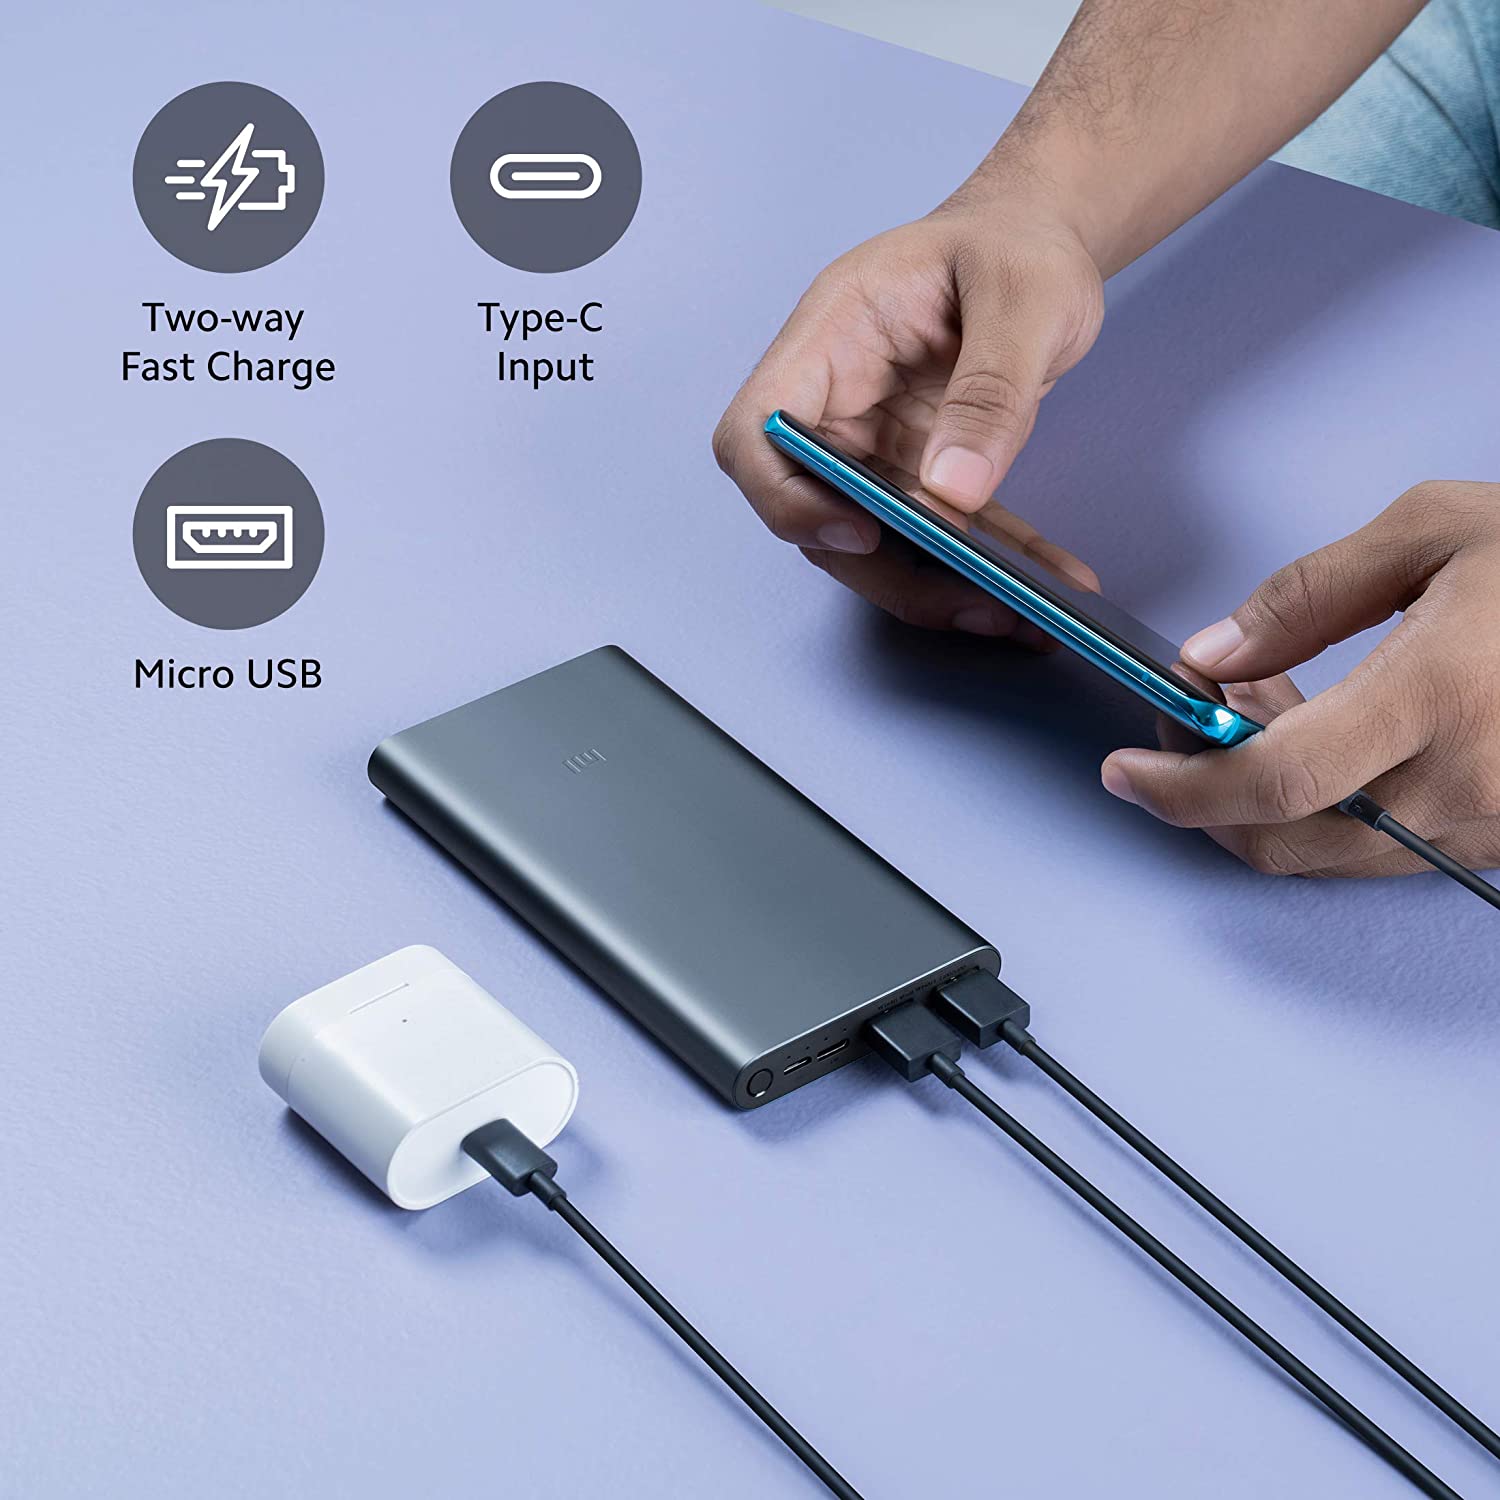 Mi Power Bank Boost Pro 30000mAh with 18W Fast Charging, Power Delivery  3.0, 24W Fast Recharging, Triple Output Port, Dual Input with Type C